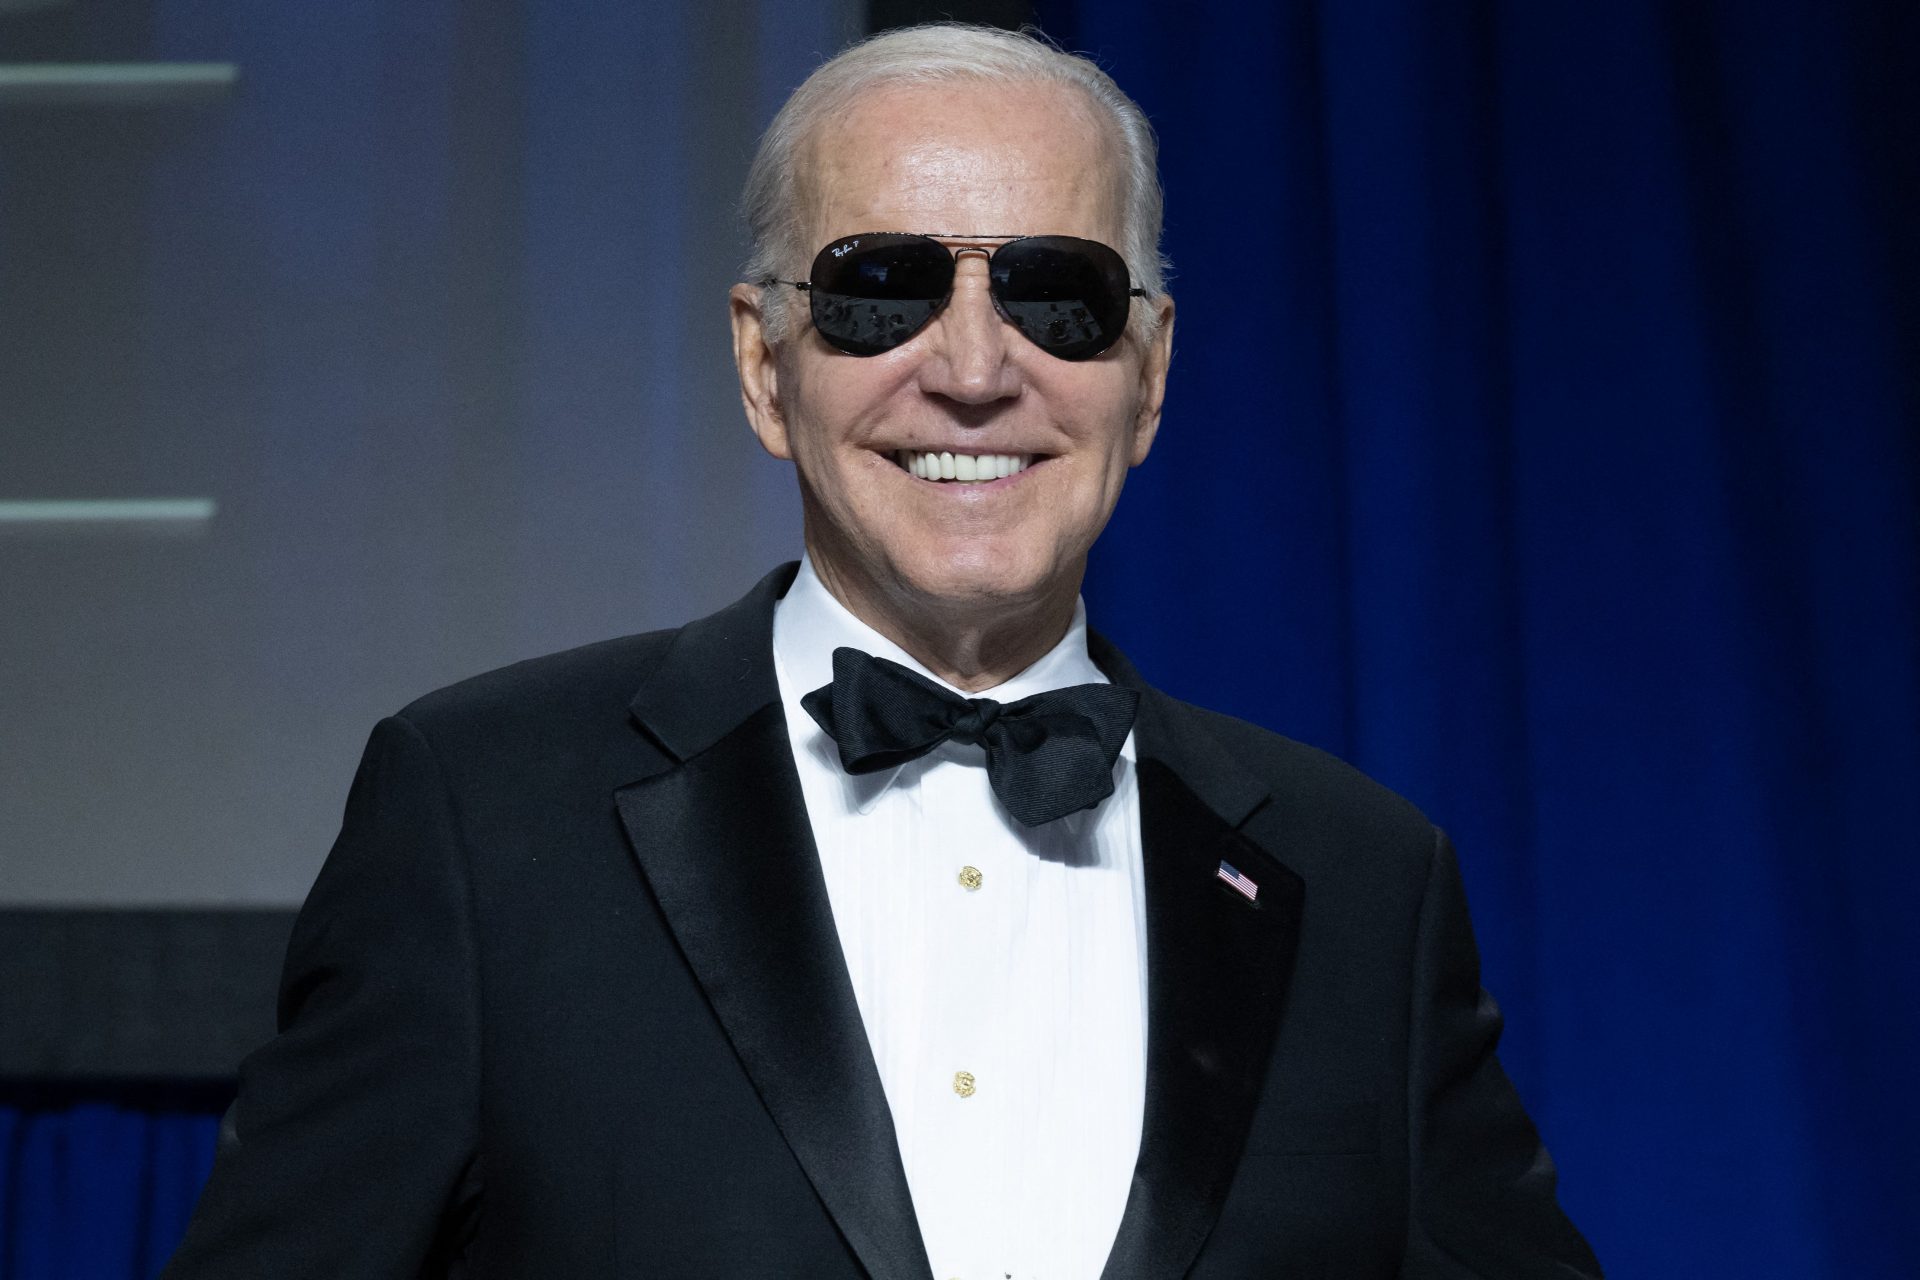 Biden brutally roasted Trump at the annual correspondents' dinner